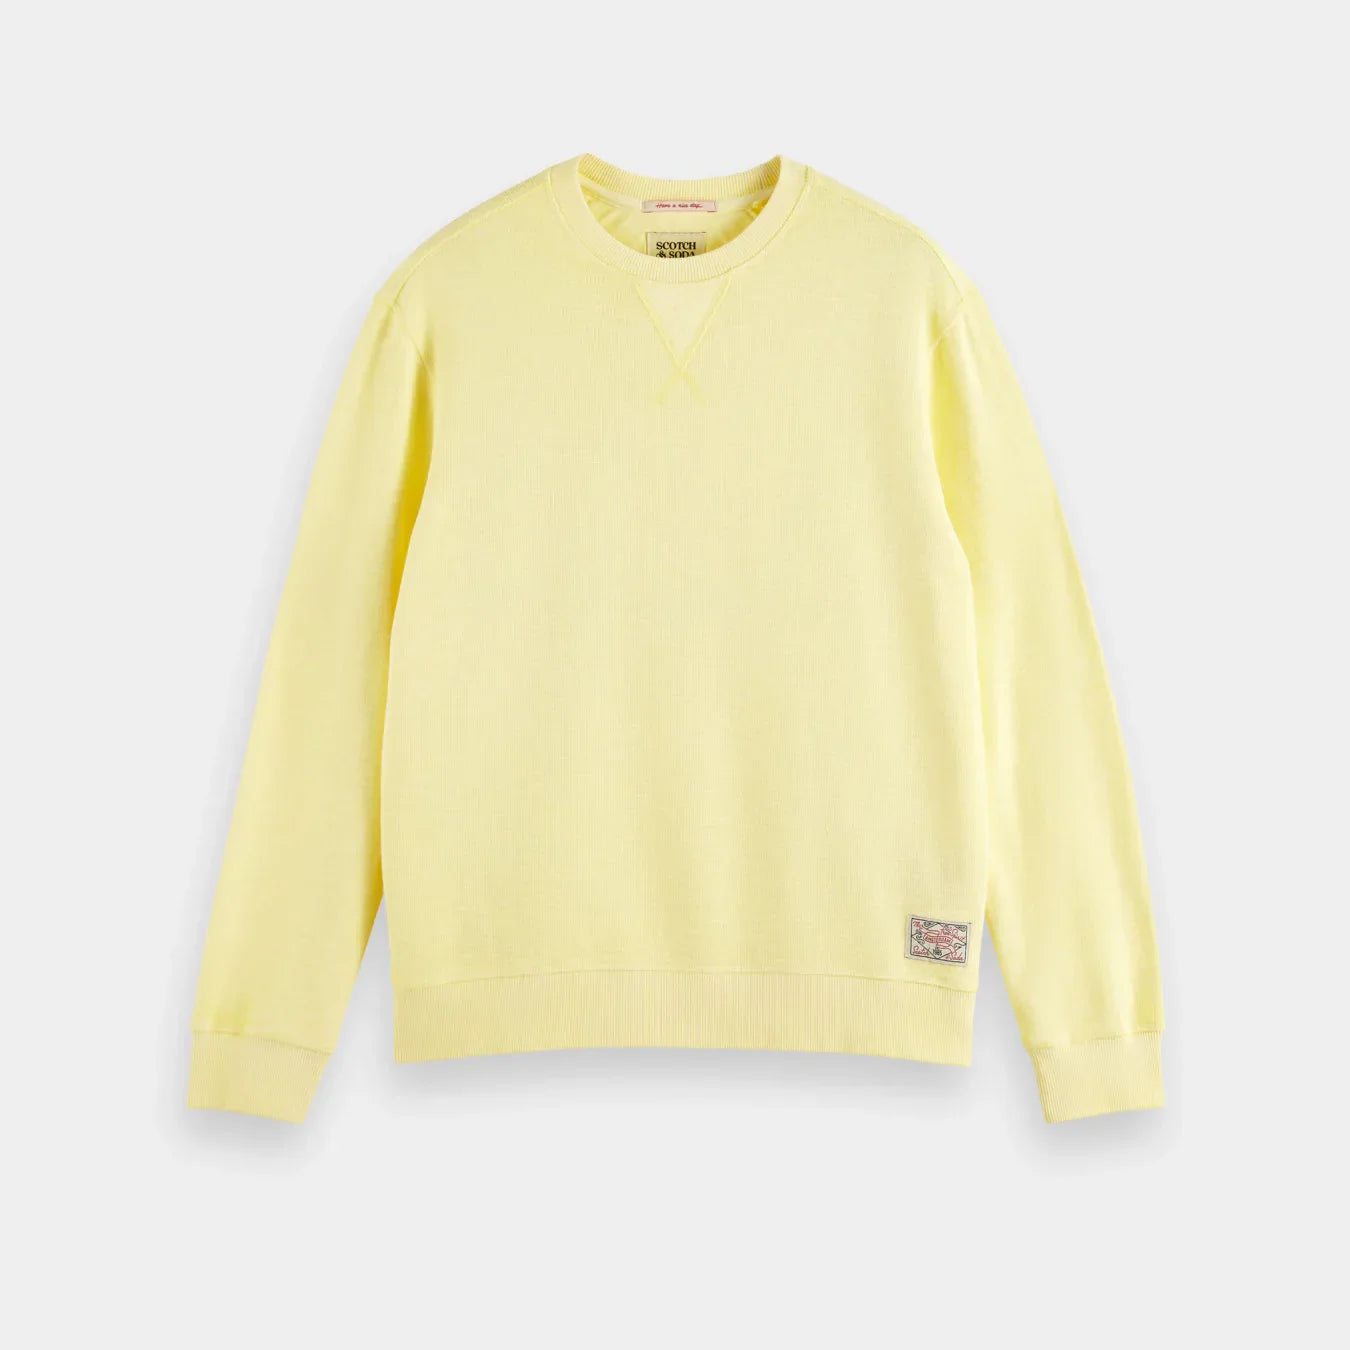 'Scotch & Soda Long Sleeve Dyed Shirt' in 'Glow' colour